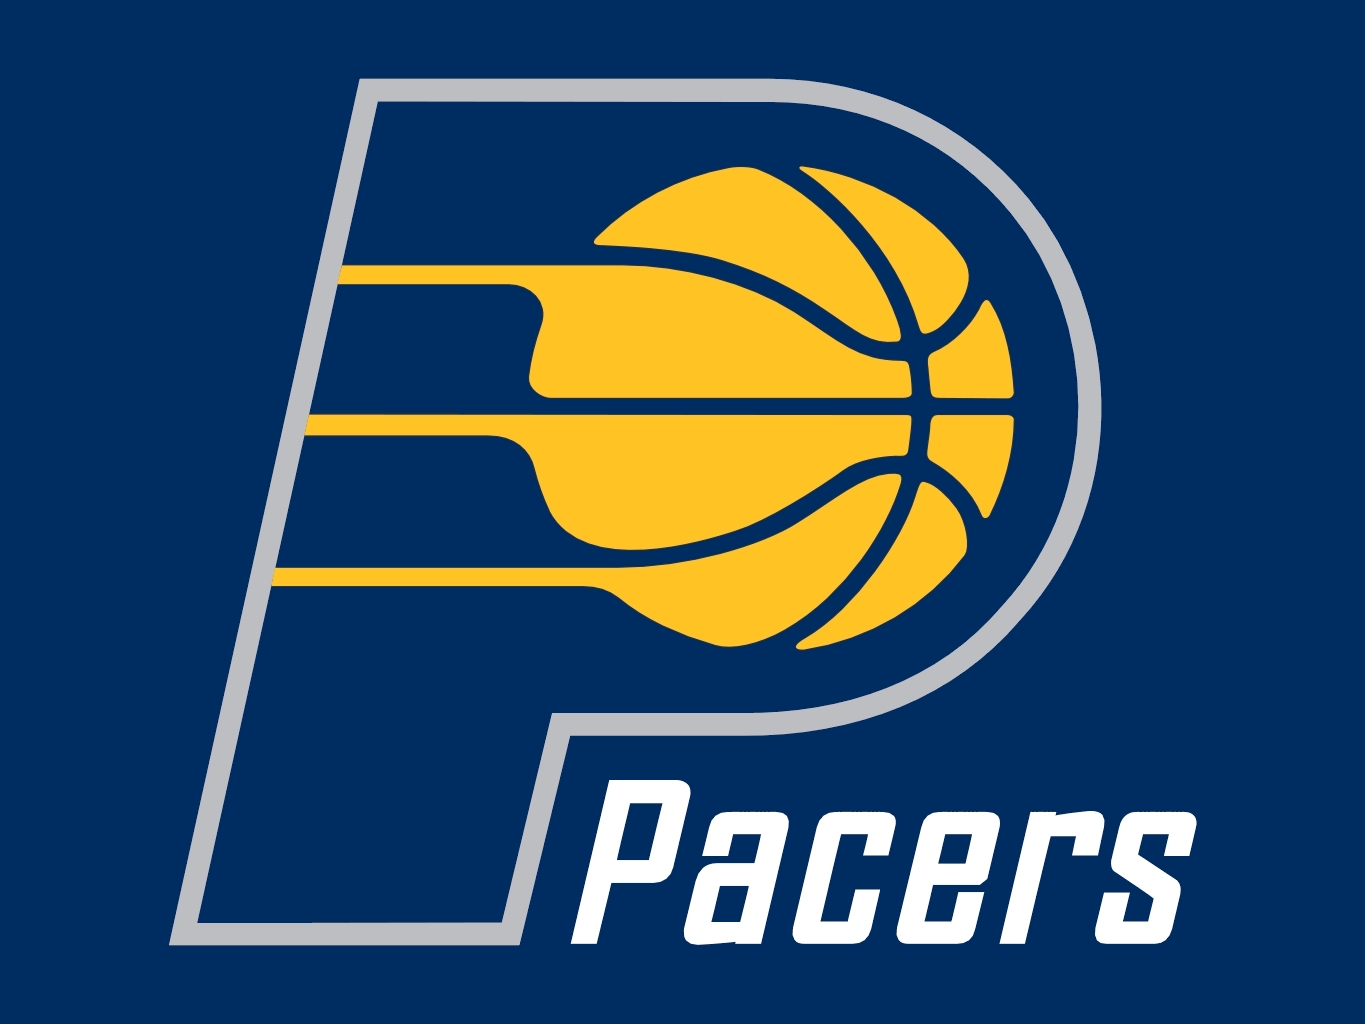 Indiana Pacers | Pro Sports Teams Wiki 